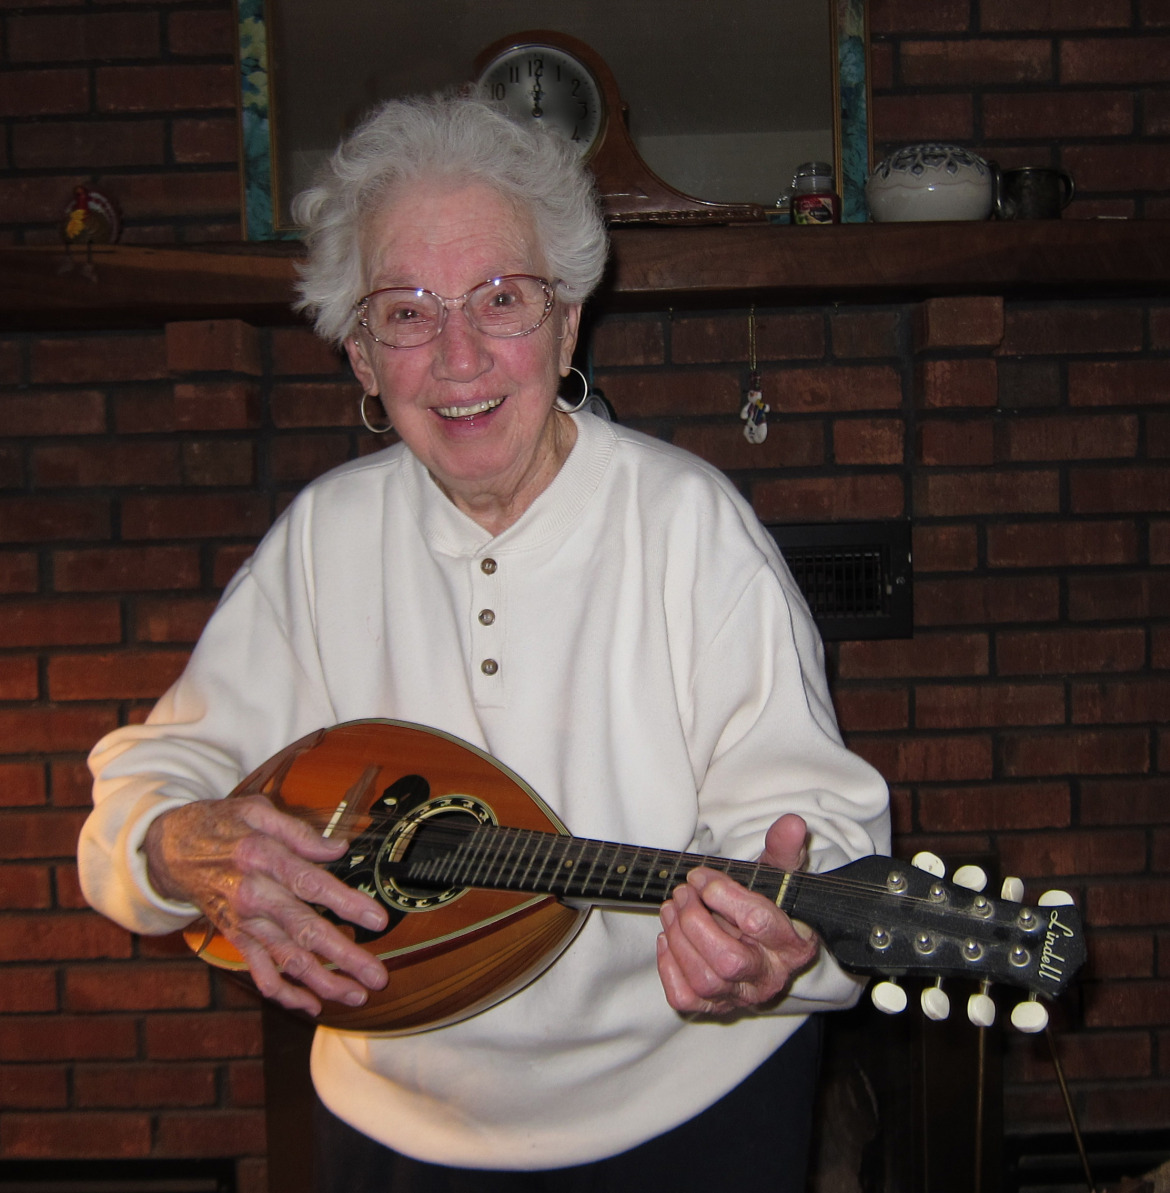 Satisfied customer, Jane Houser strums her mandolin purchased at Kennedy Music in the early 1970's.